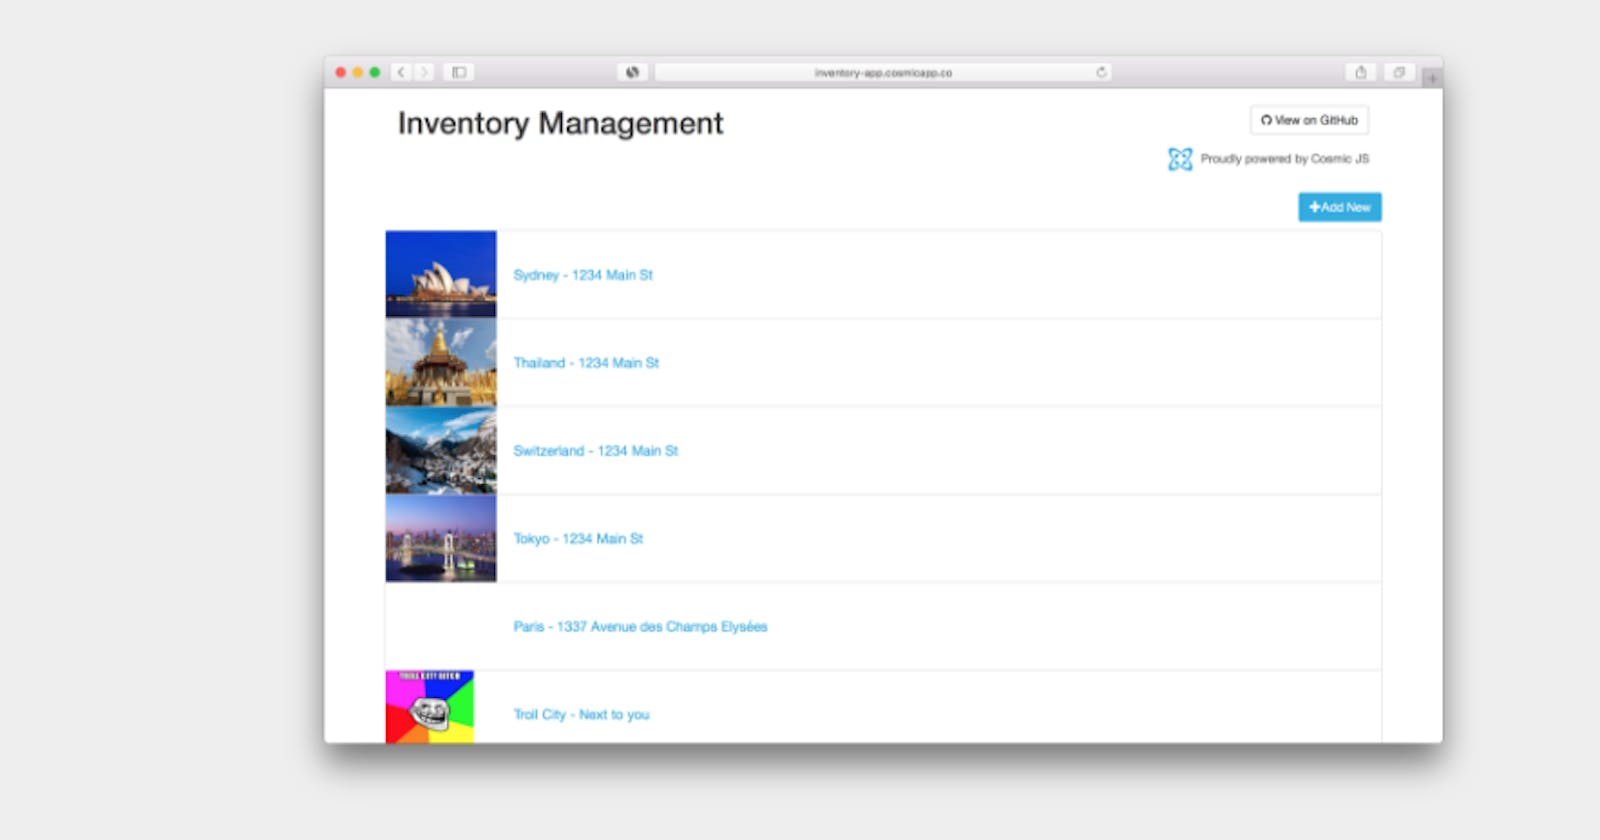 Building an Inventory Management App Using Vue.js and Laravel